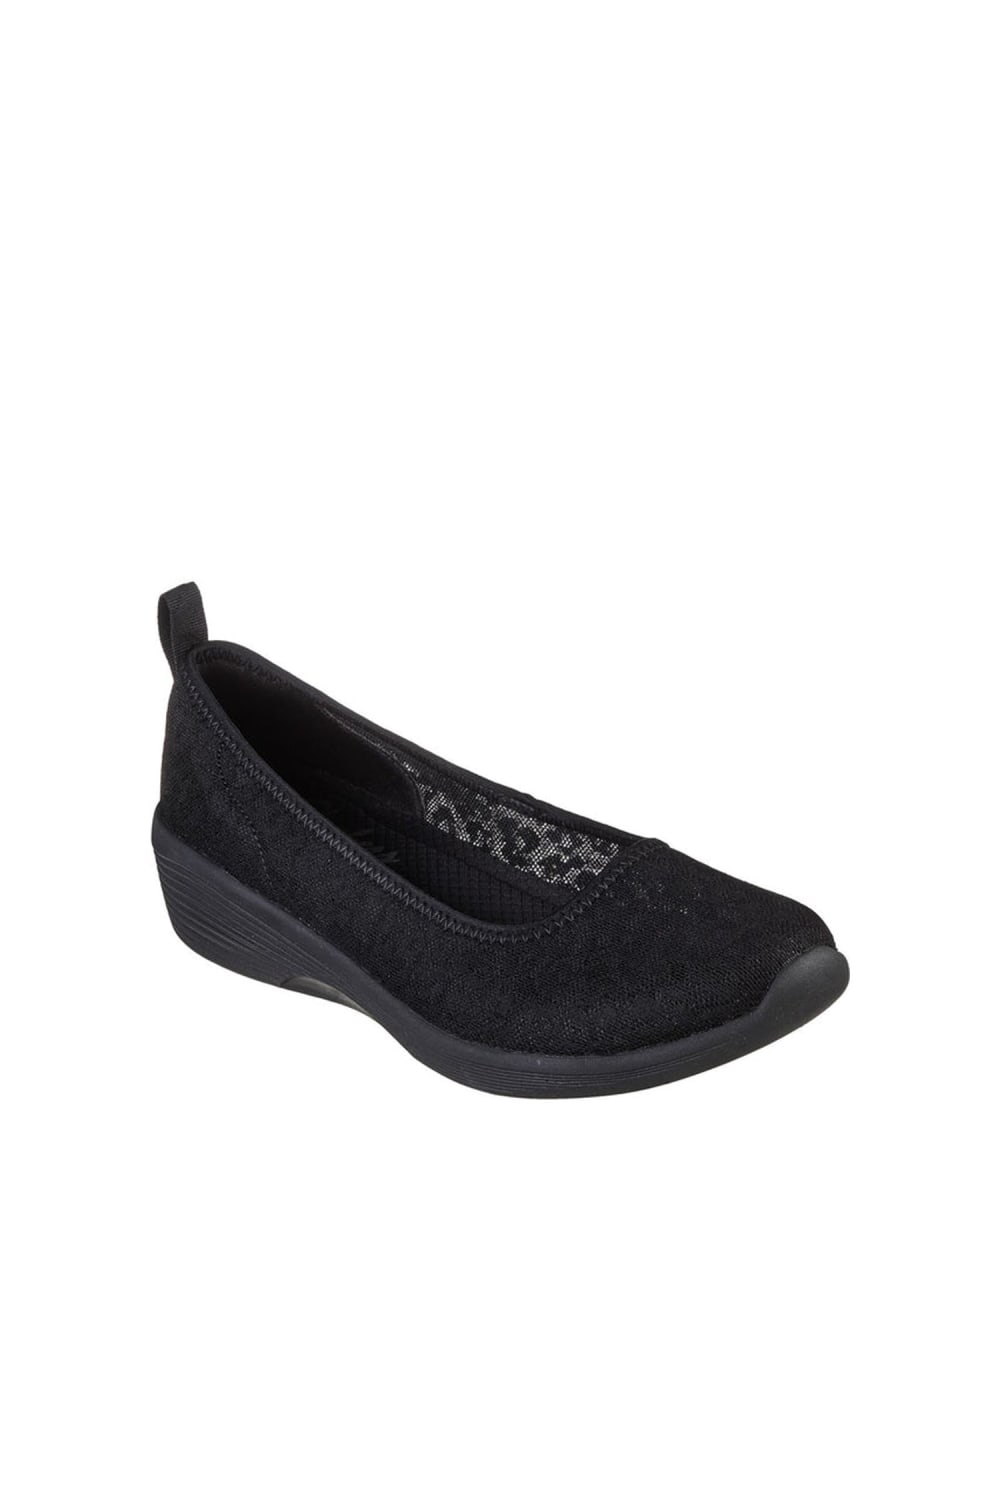 Womens/Ladies Arya Wild Insight Casual Shoes